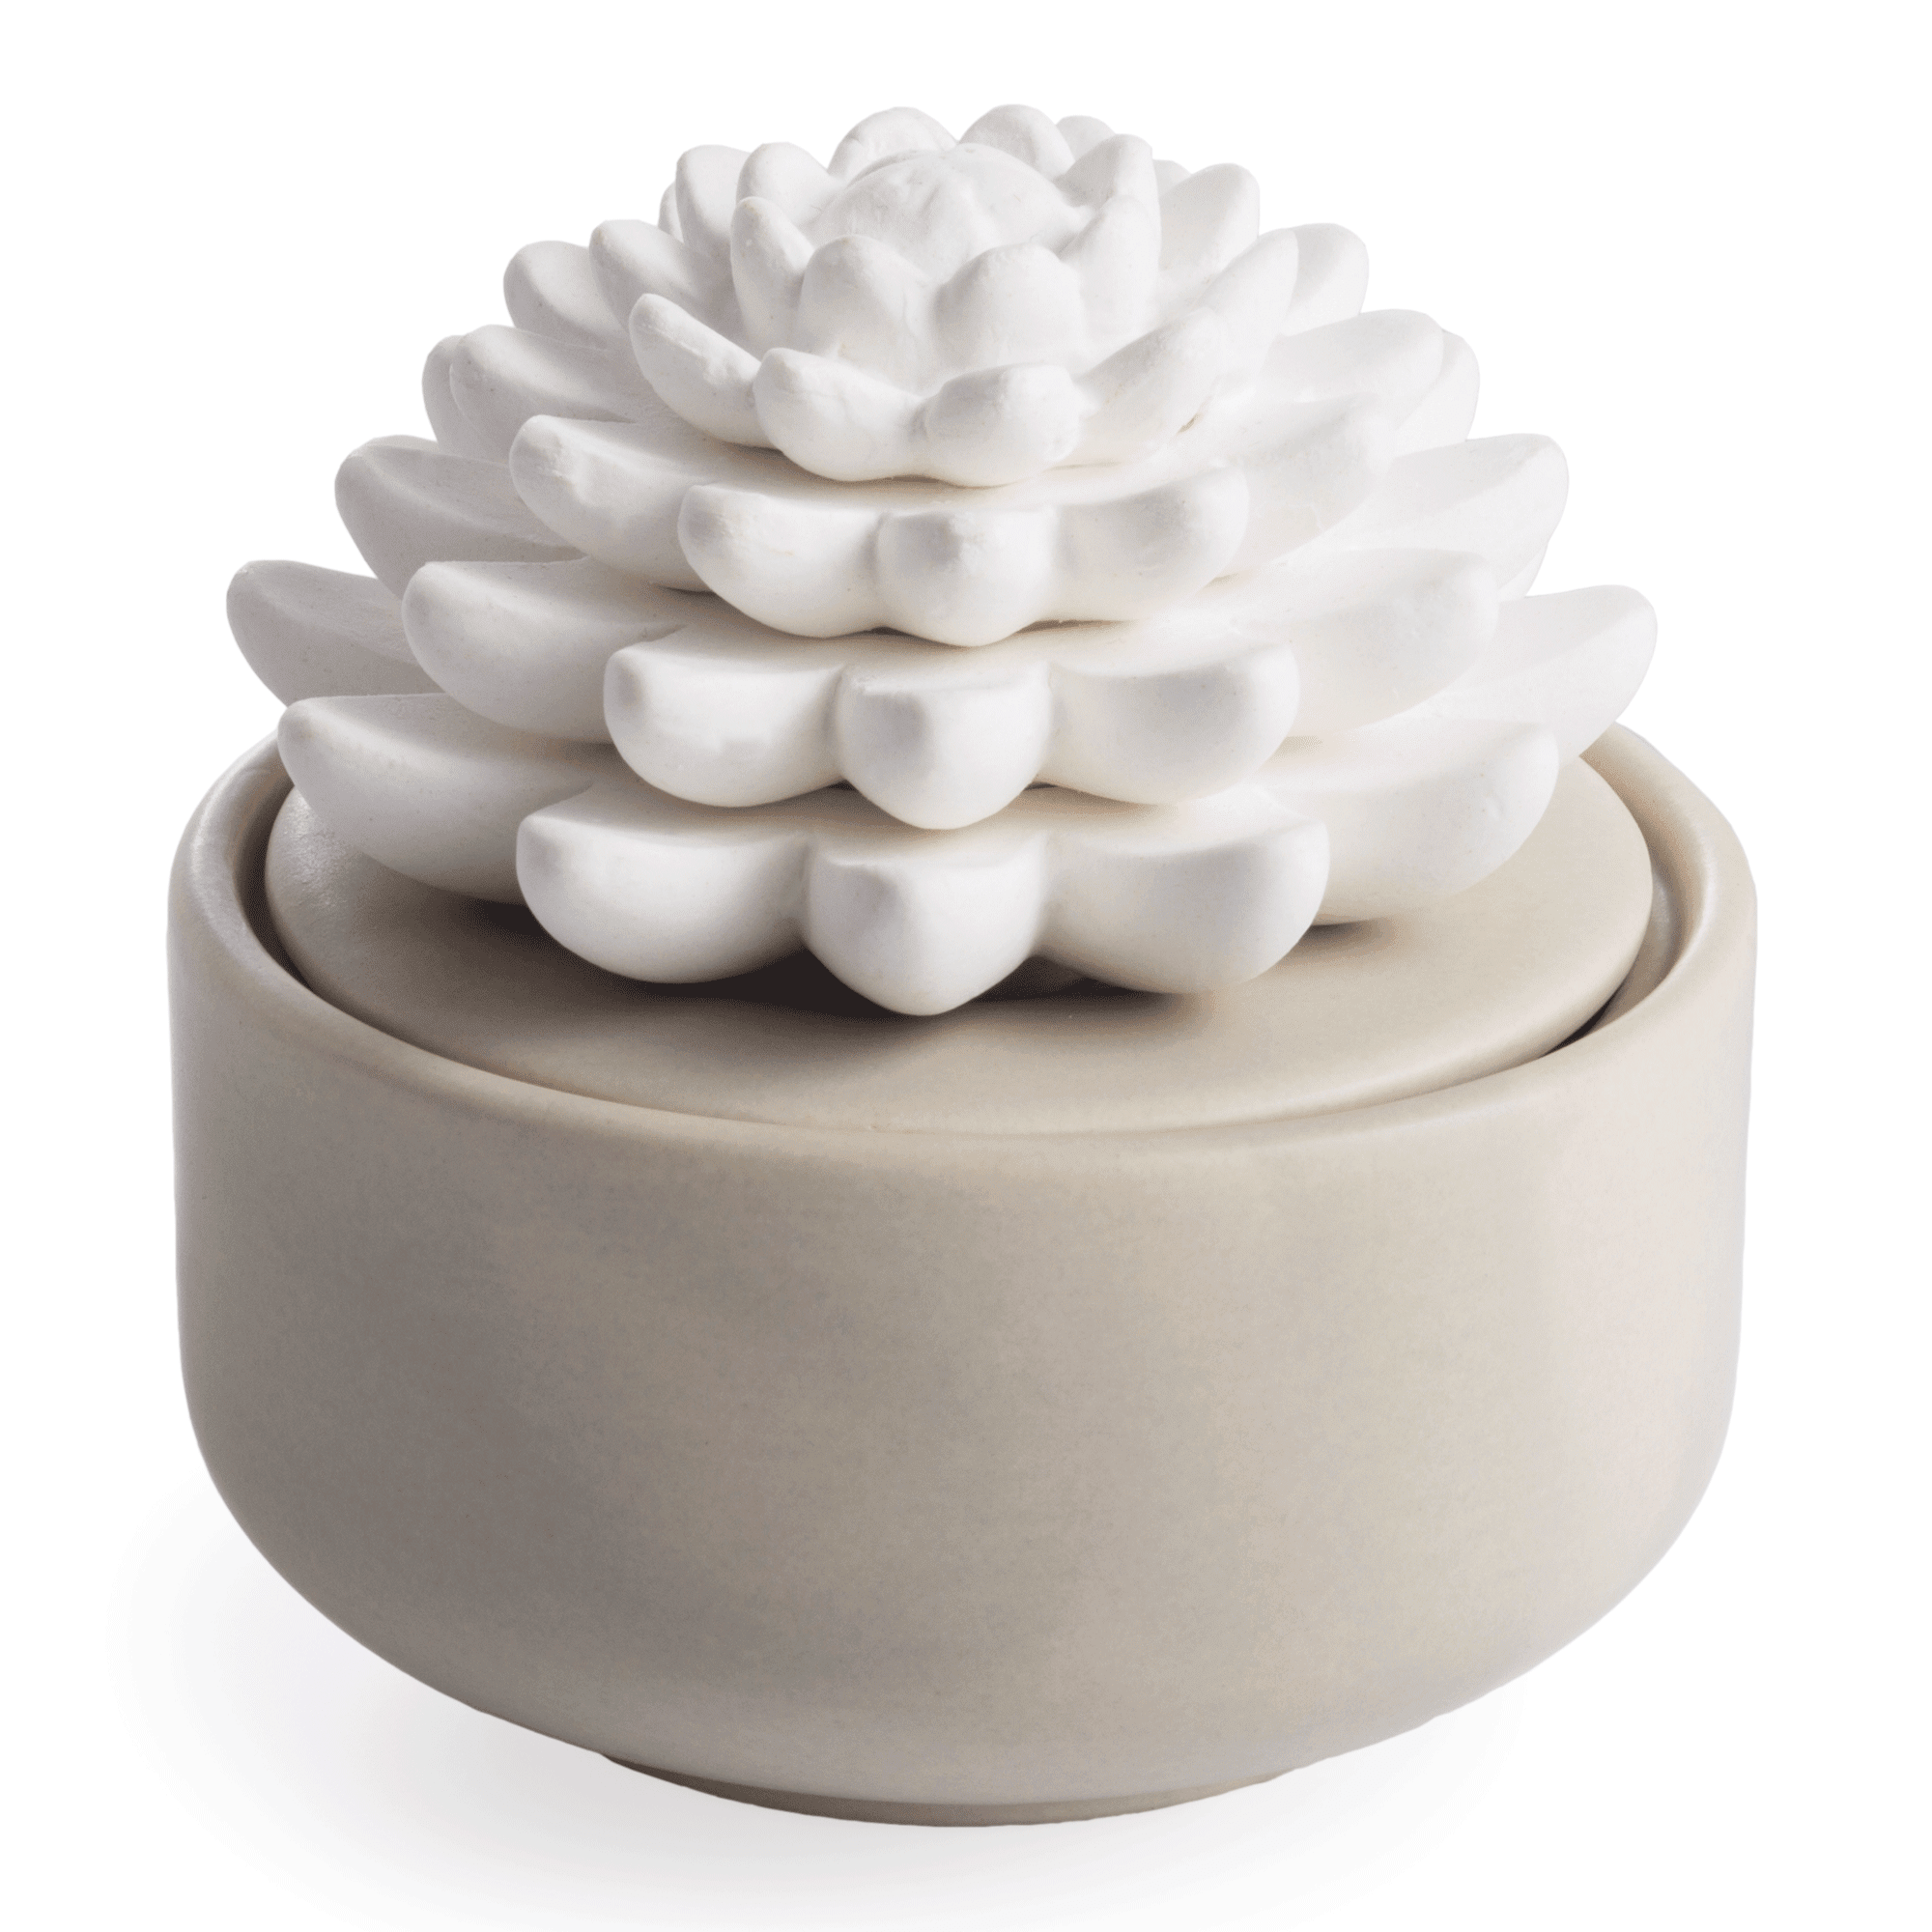  OMOONS Pots,Portable Wireless White Ceramic Electric